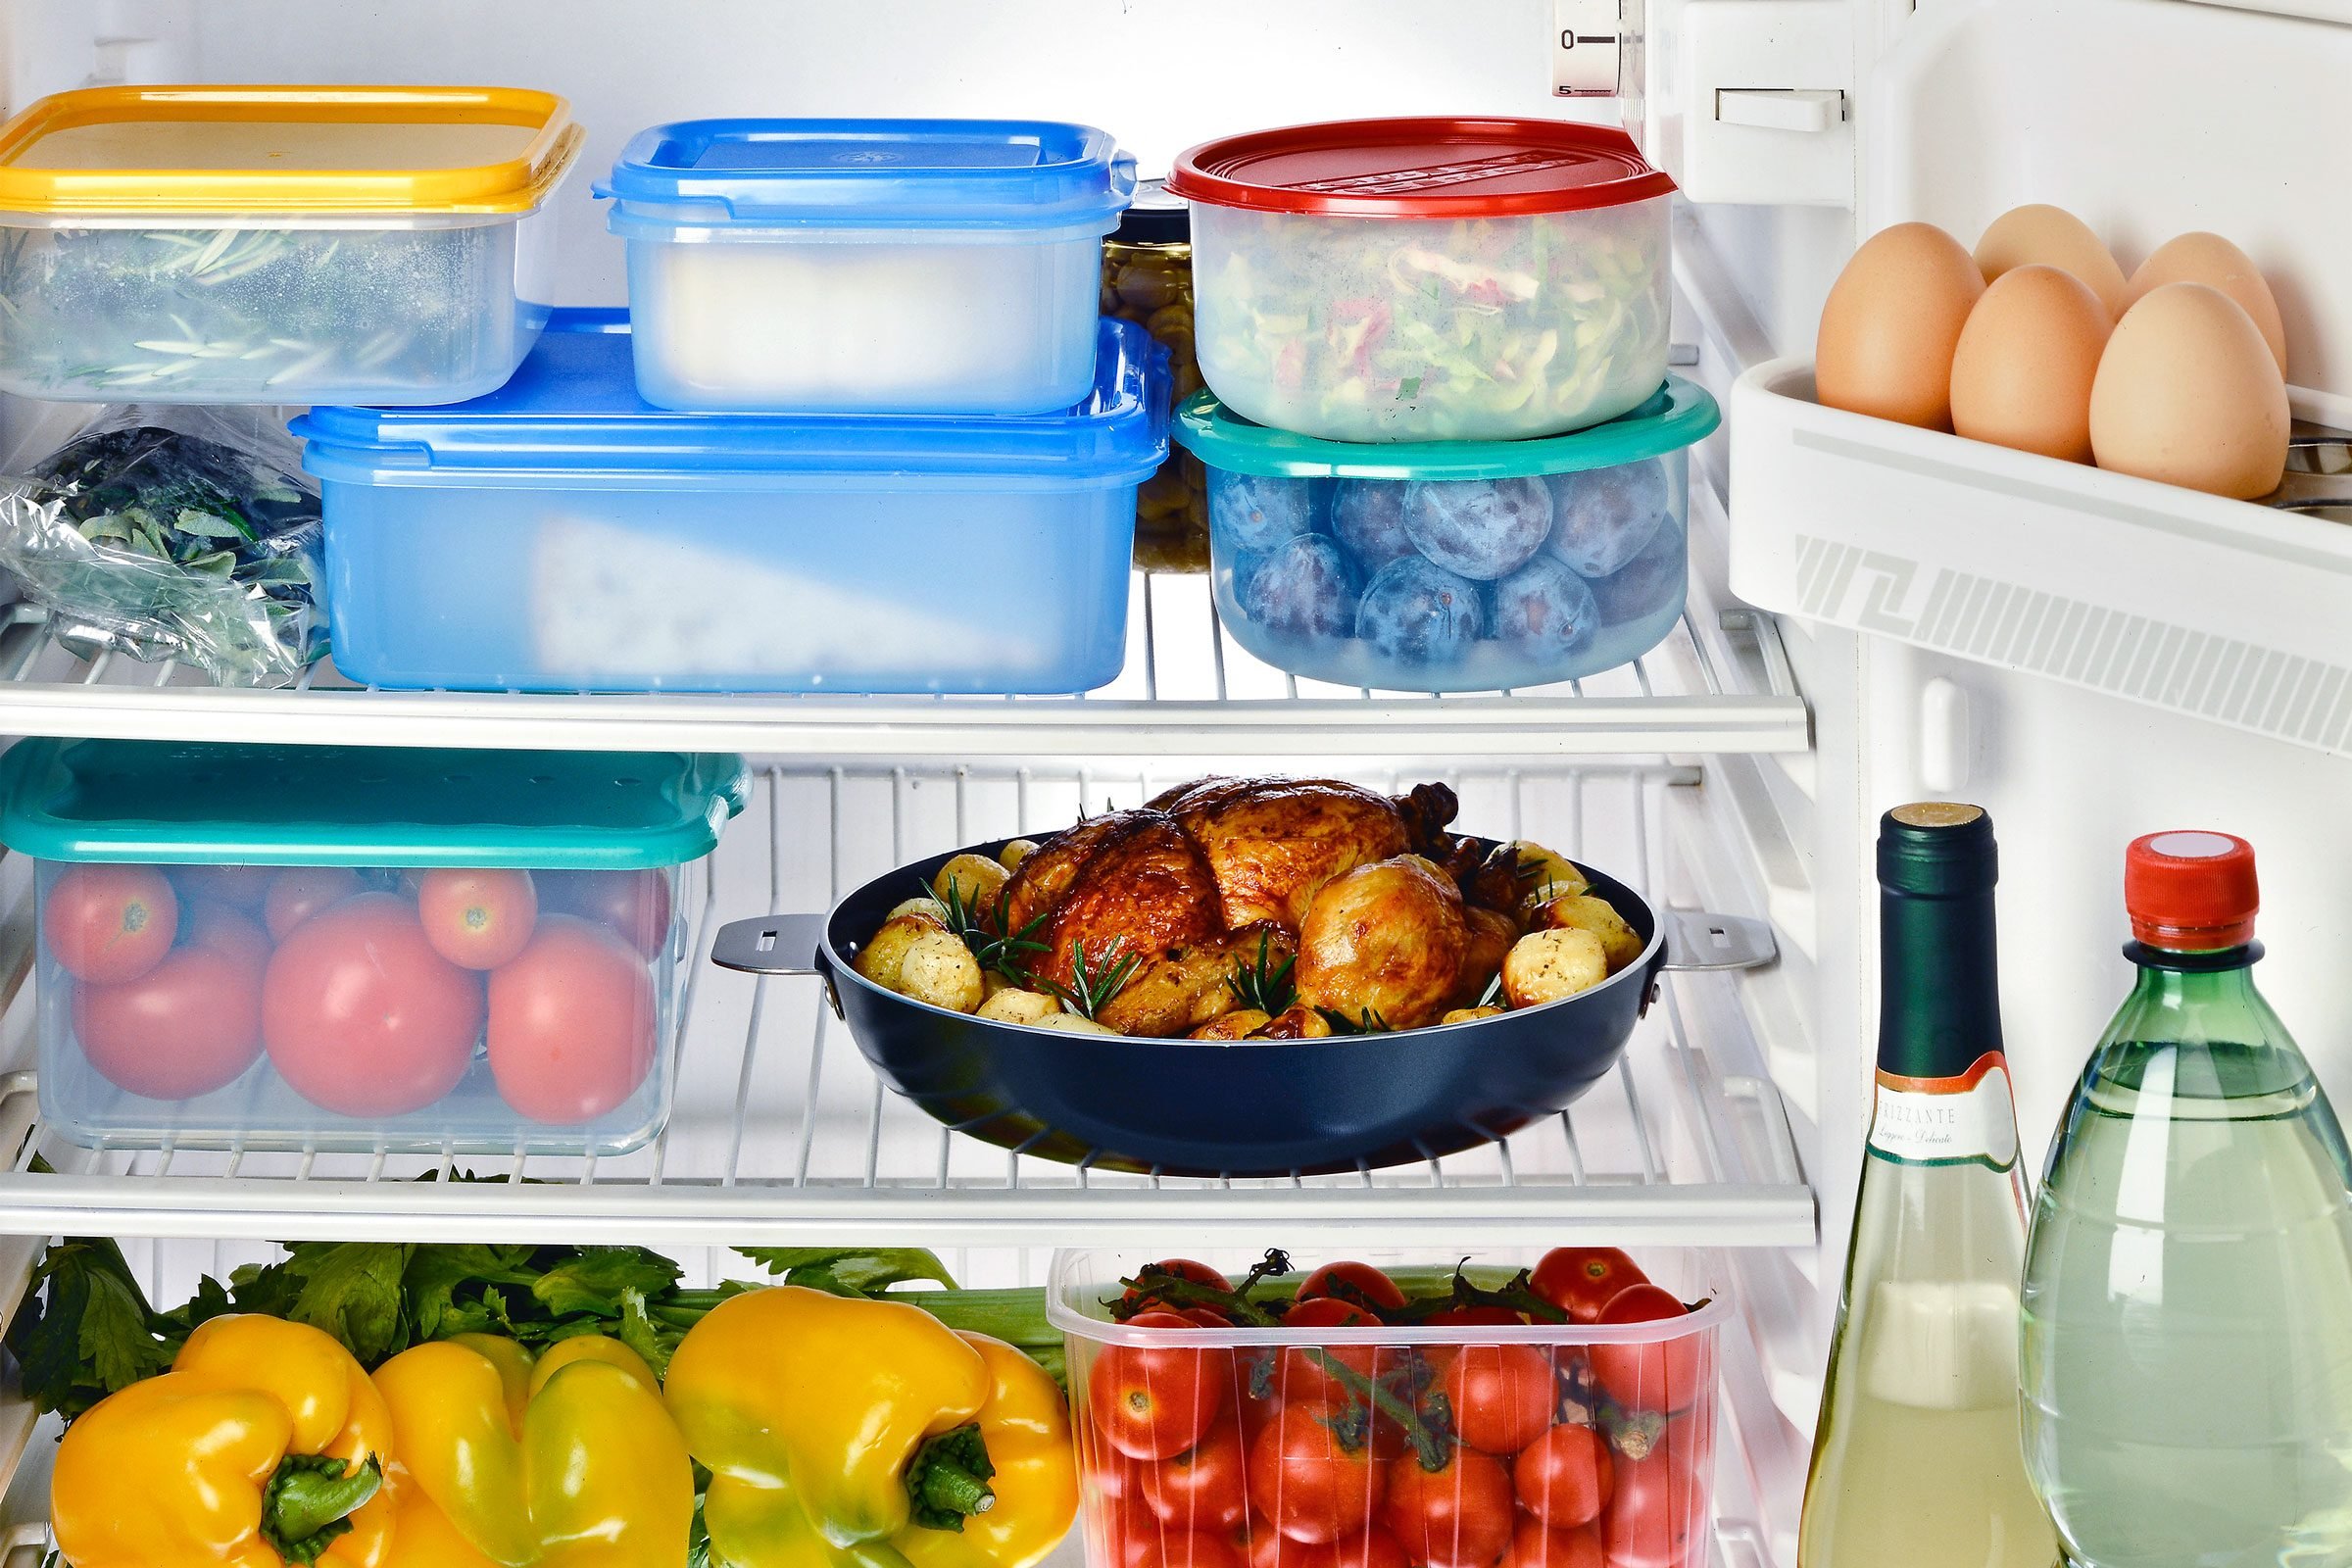 https://www.rd.com/wp-content/uploads/2022/11/assortment-of-food-in-open-refrigerator-GettyImages-486196614-MLedit.jpg?fit=700%2C1024